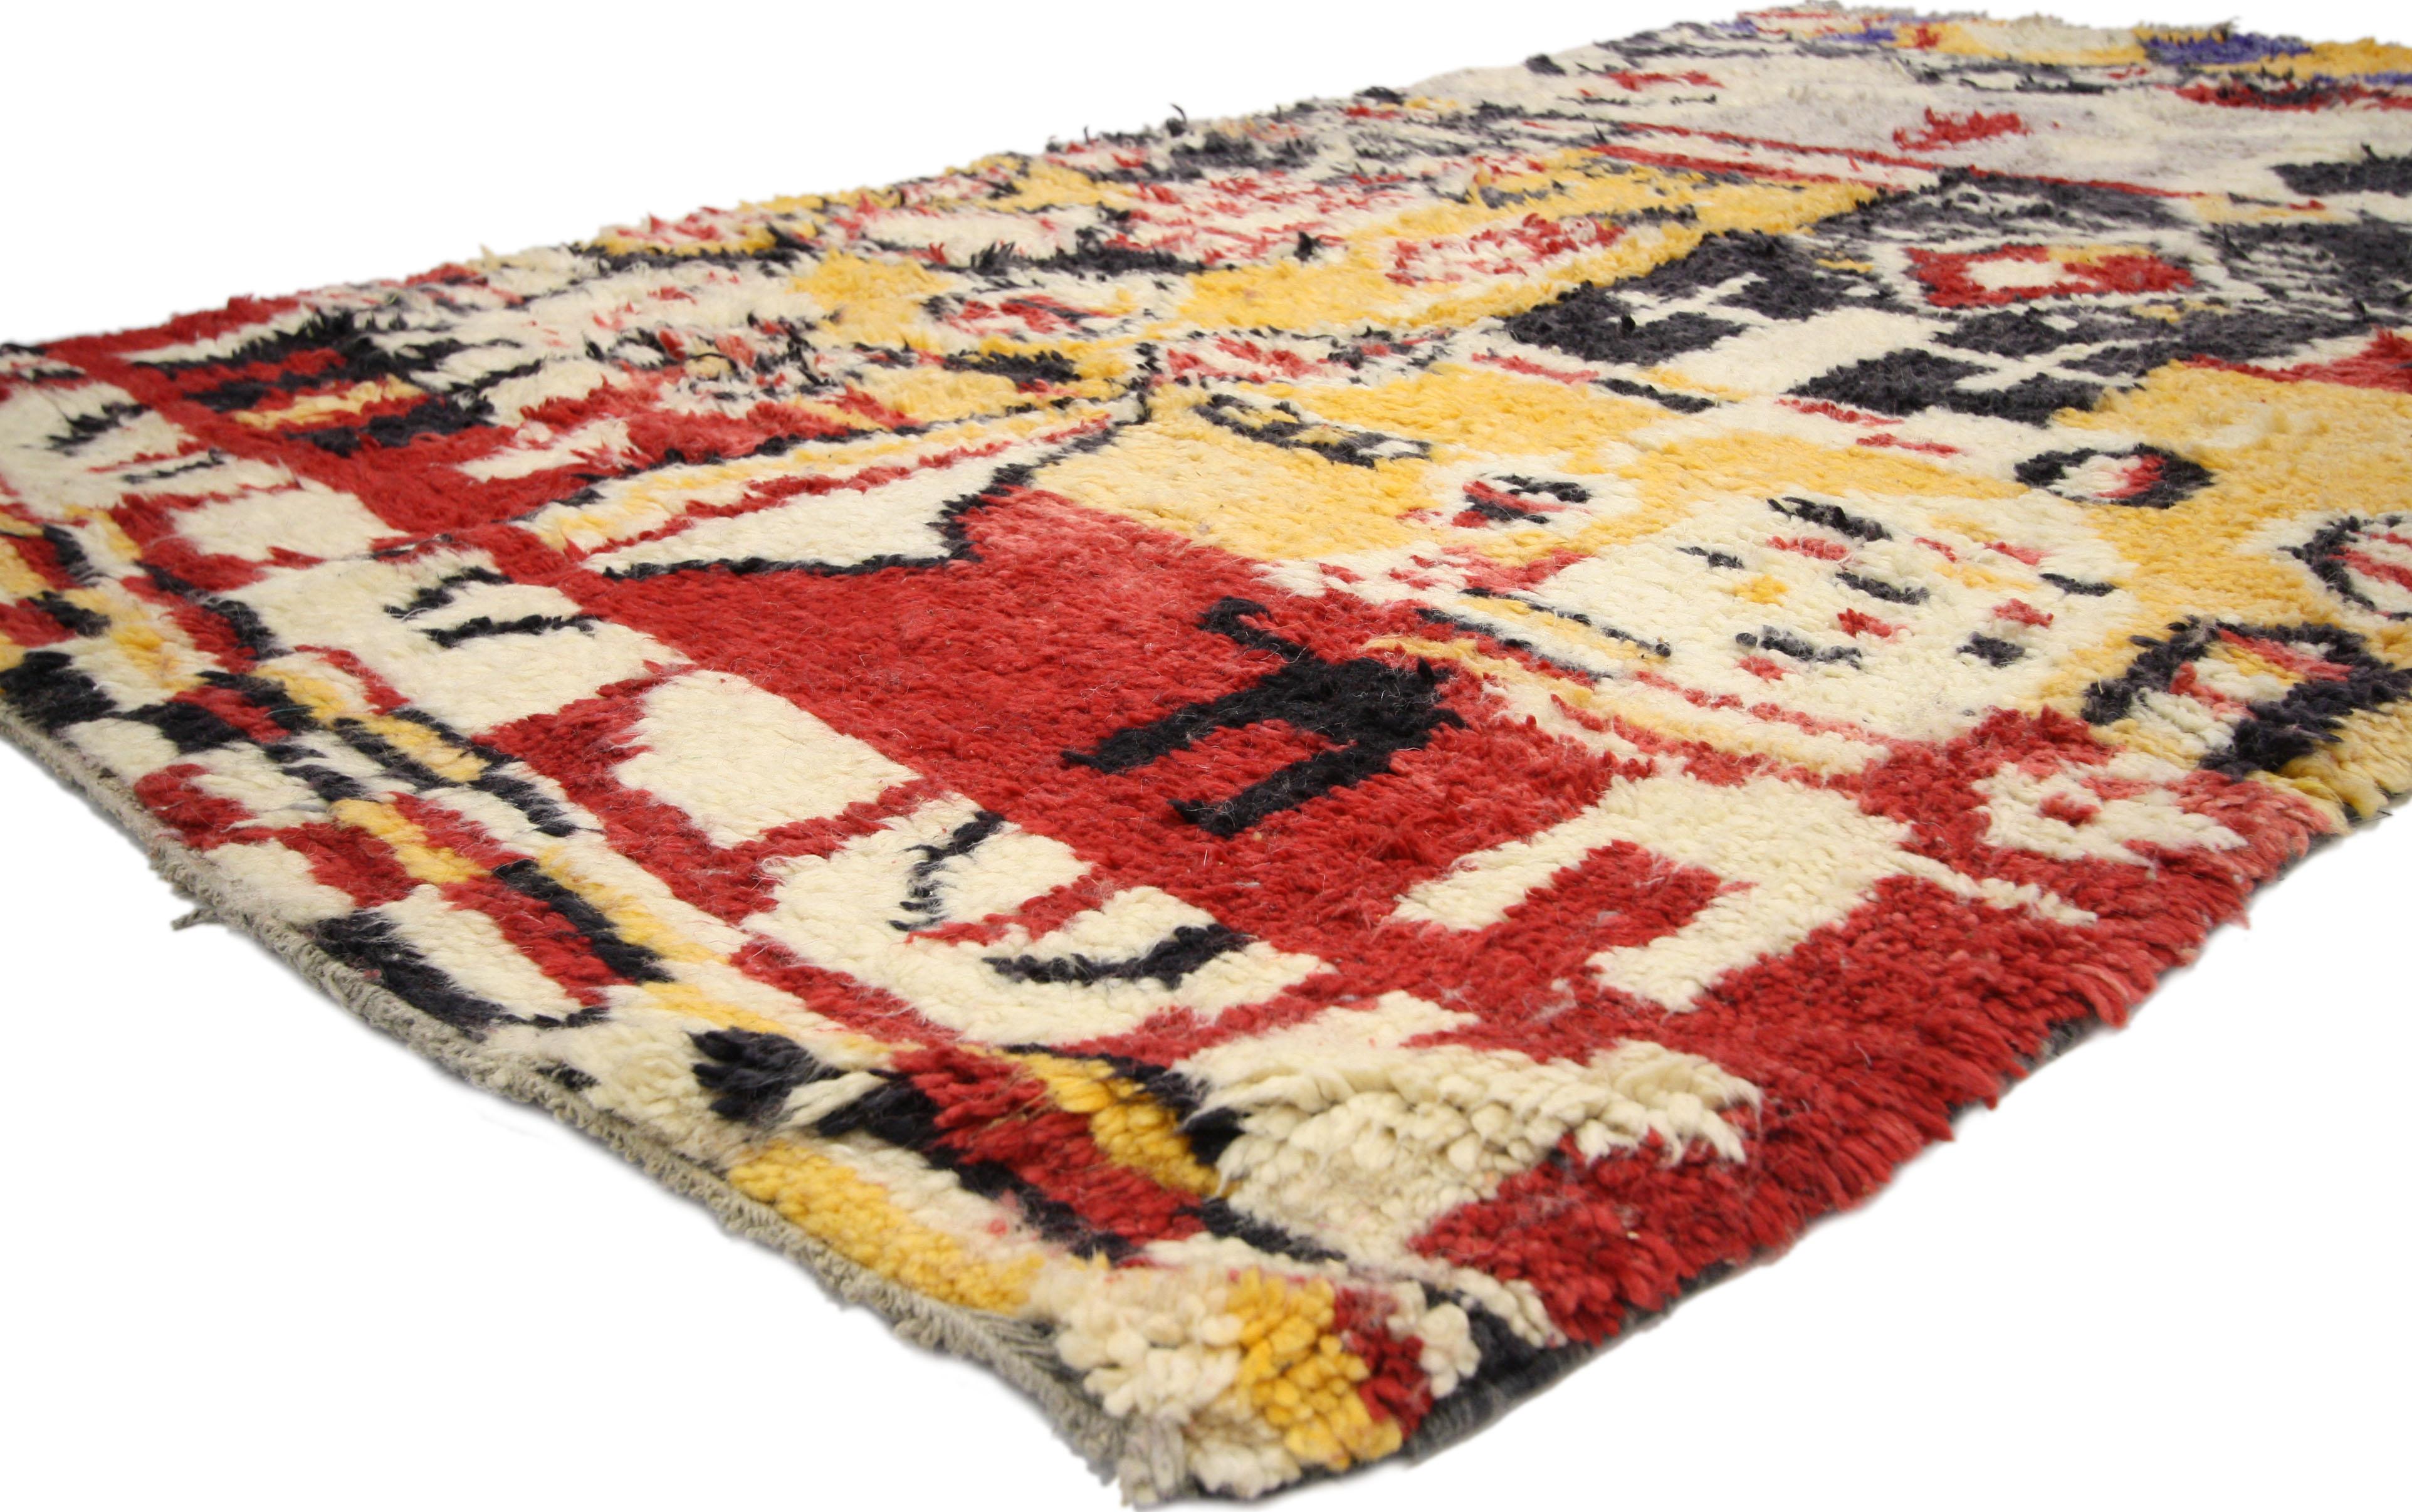 20709 Vintage Boujad Moroccan Rug, 05'03 x 08'09. Step into a realm of vibrant aesthetics with Boujad rugs, renowned for their dynamic geometric motifs and striking color palettes. Beneath their visual allure lies deeper significance, as the